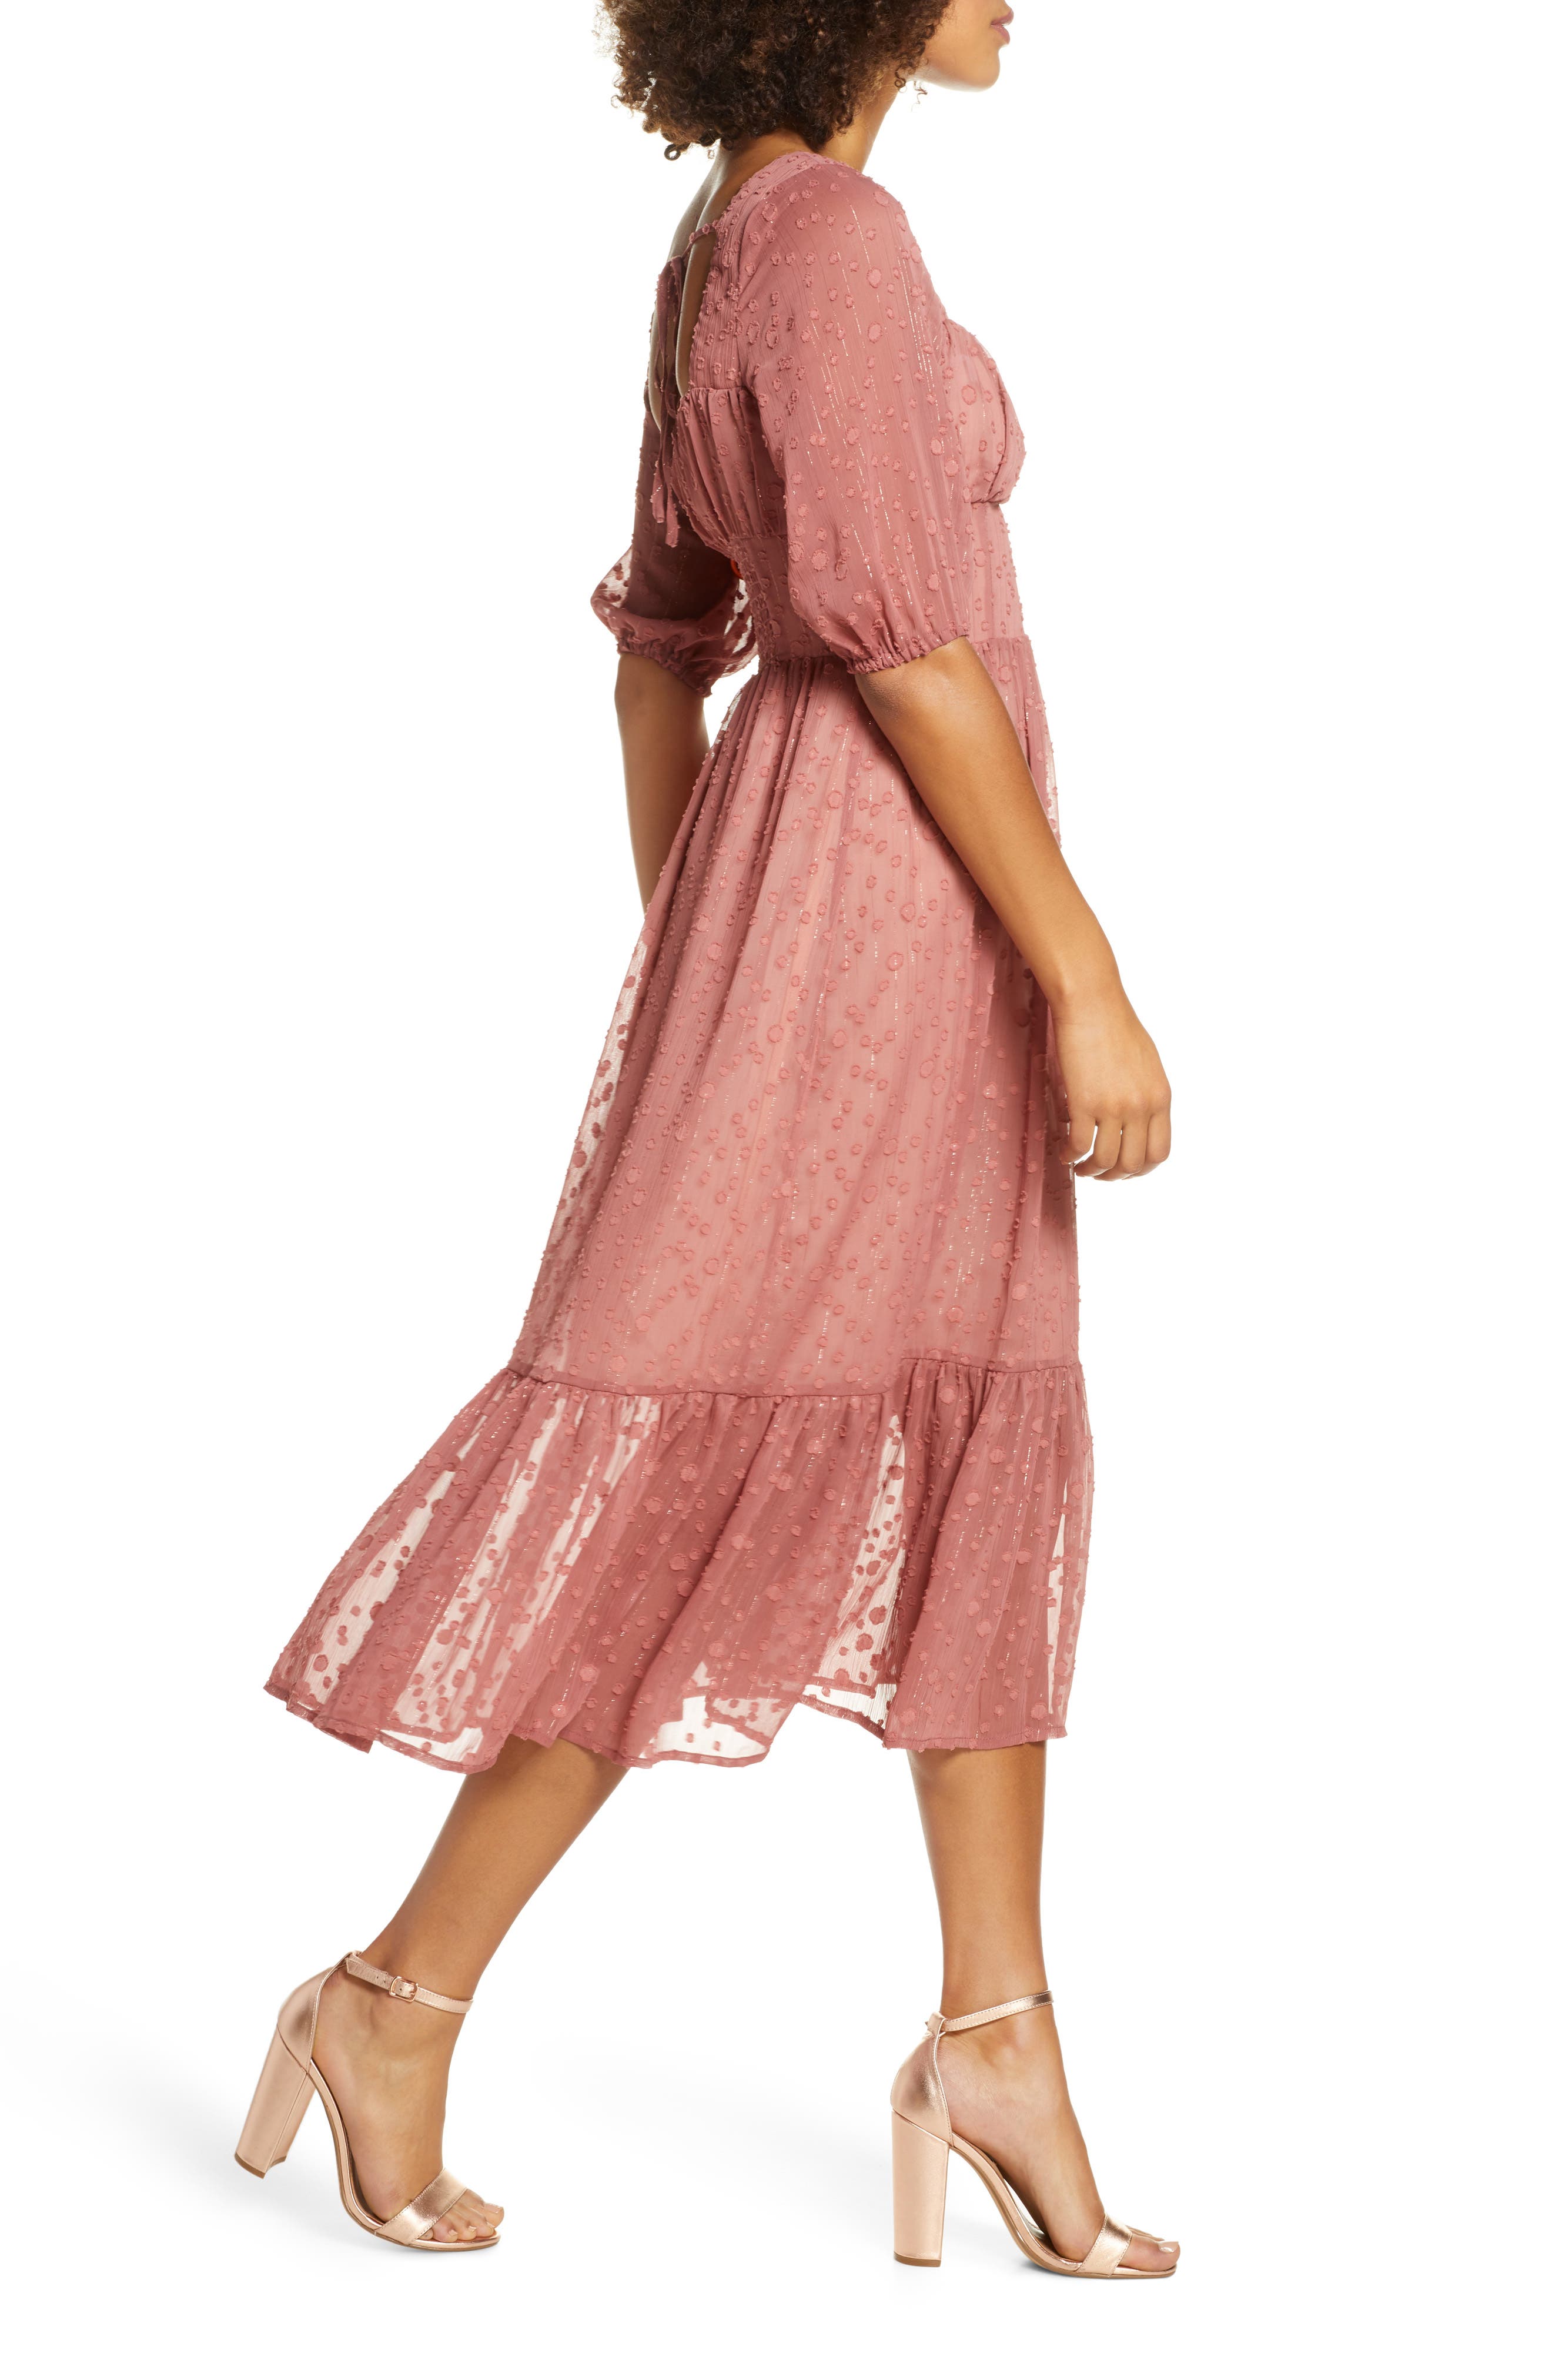 Get In on the Prairie Dress Trend This Winter If You Hate Wearing